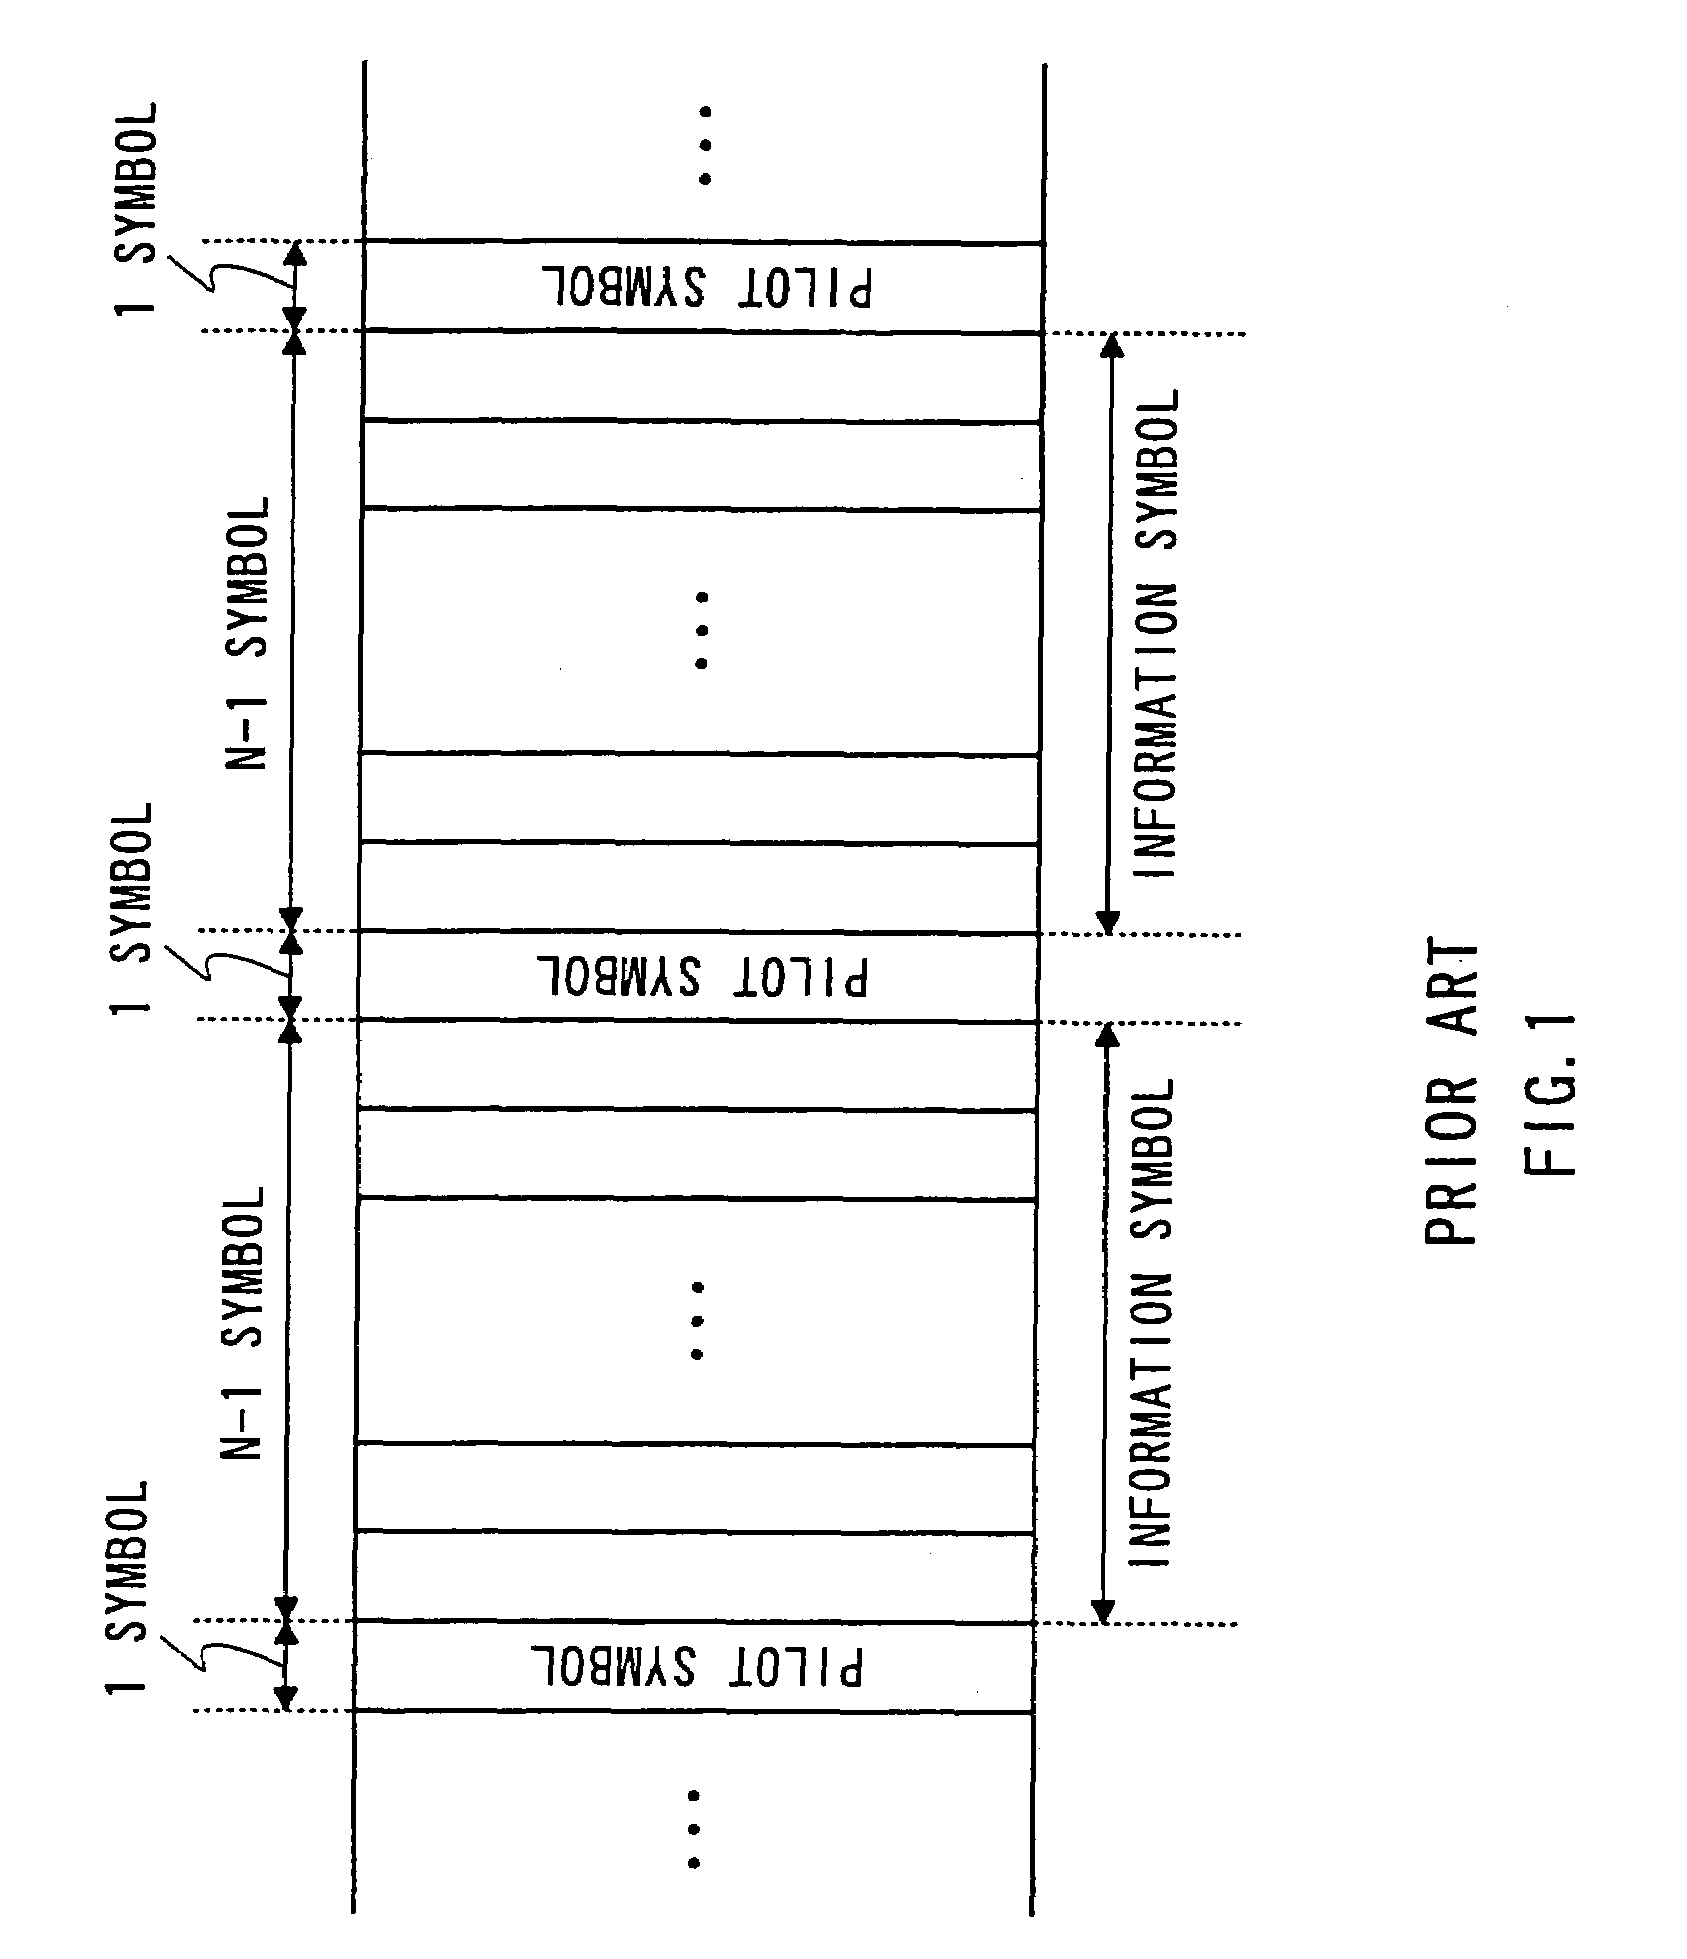 Apparatus and method for digital wireless communications